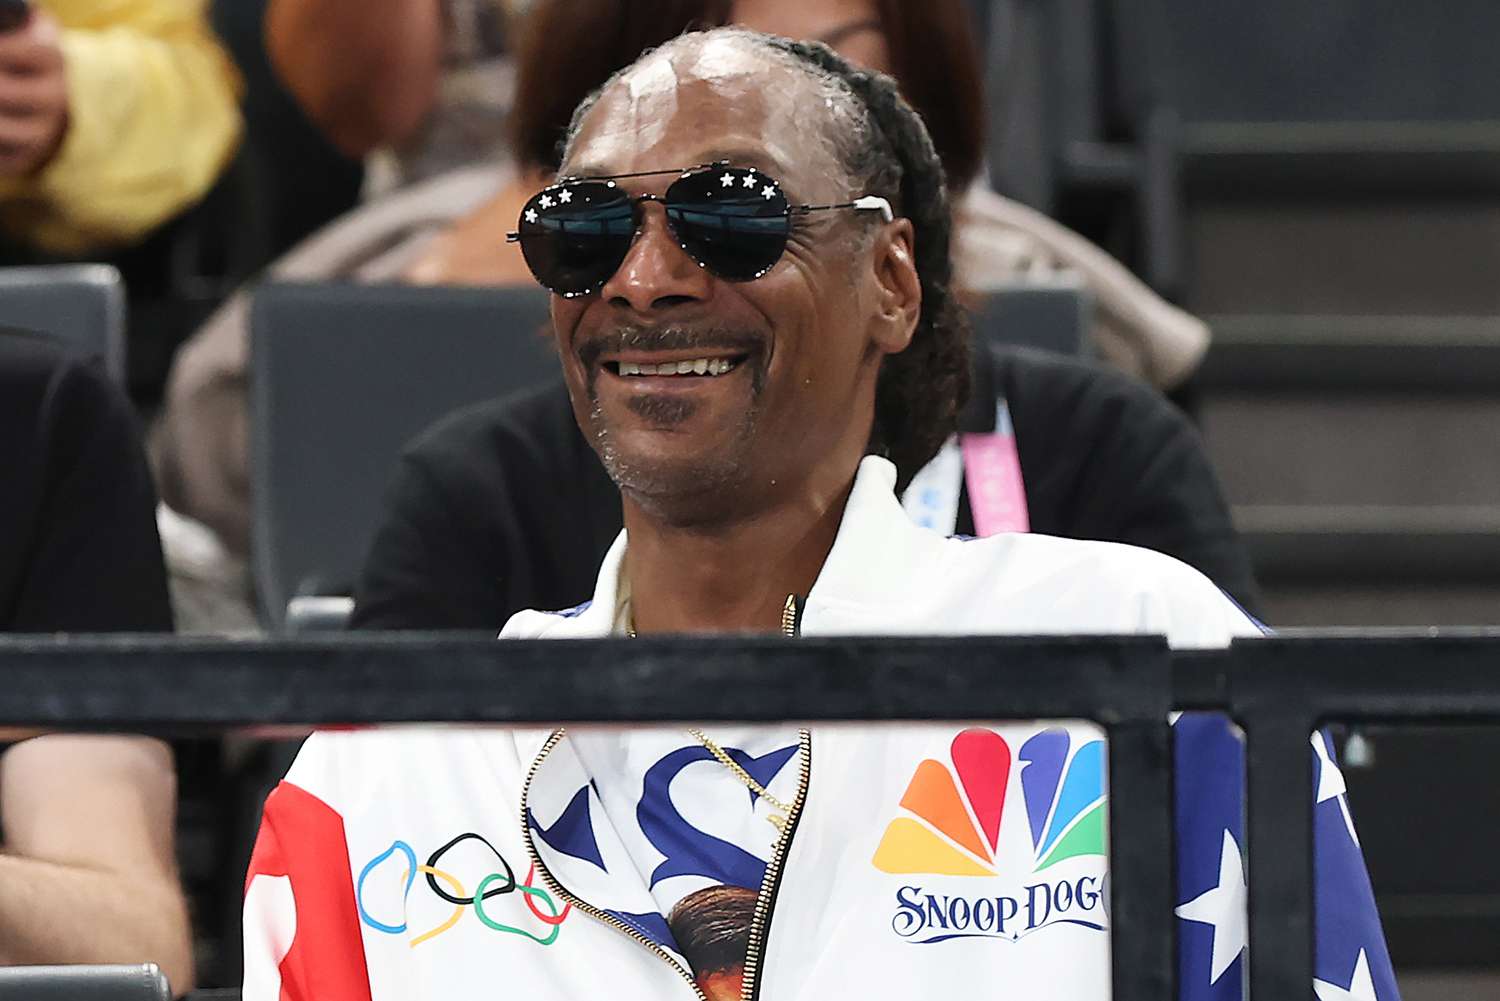 Snoop Dogg goes 'snooping around' the Louvre at Paris Olympics